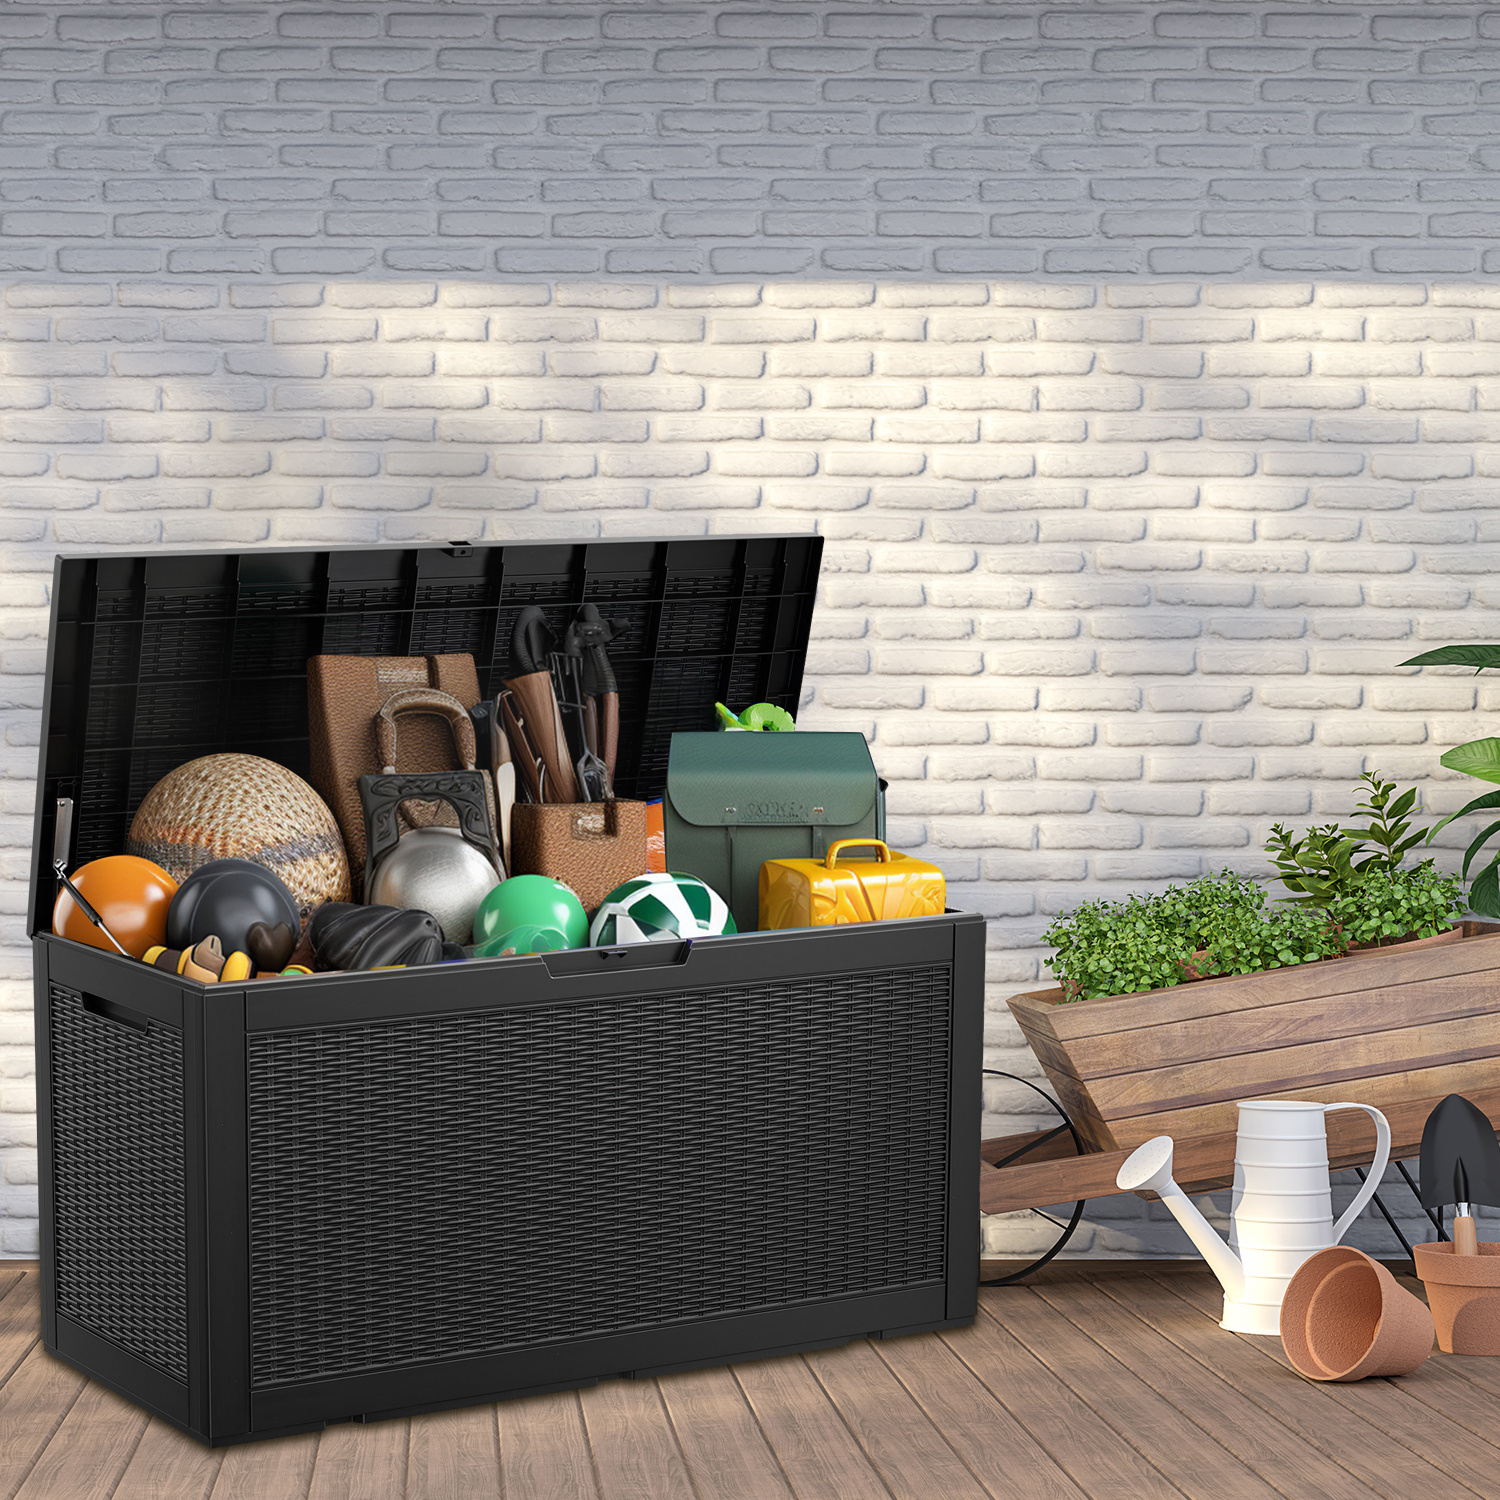 

Large Resin Deck Box, Weather-resistant Resin Lockable For Organizing And Storing Patio Furniture And Outdoor Items, Also As A Comfortable Outdoor Bench